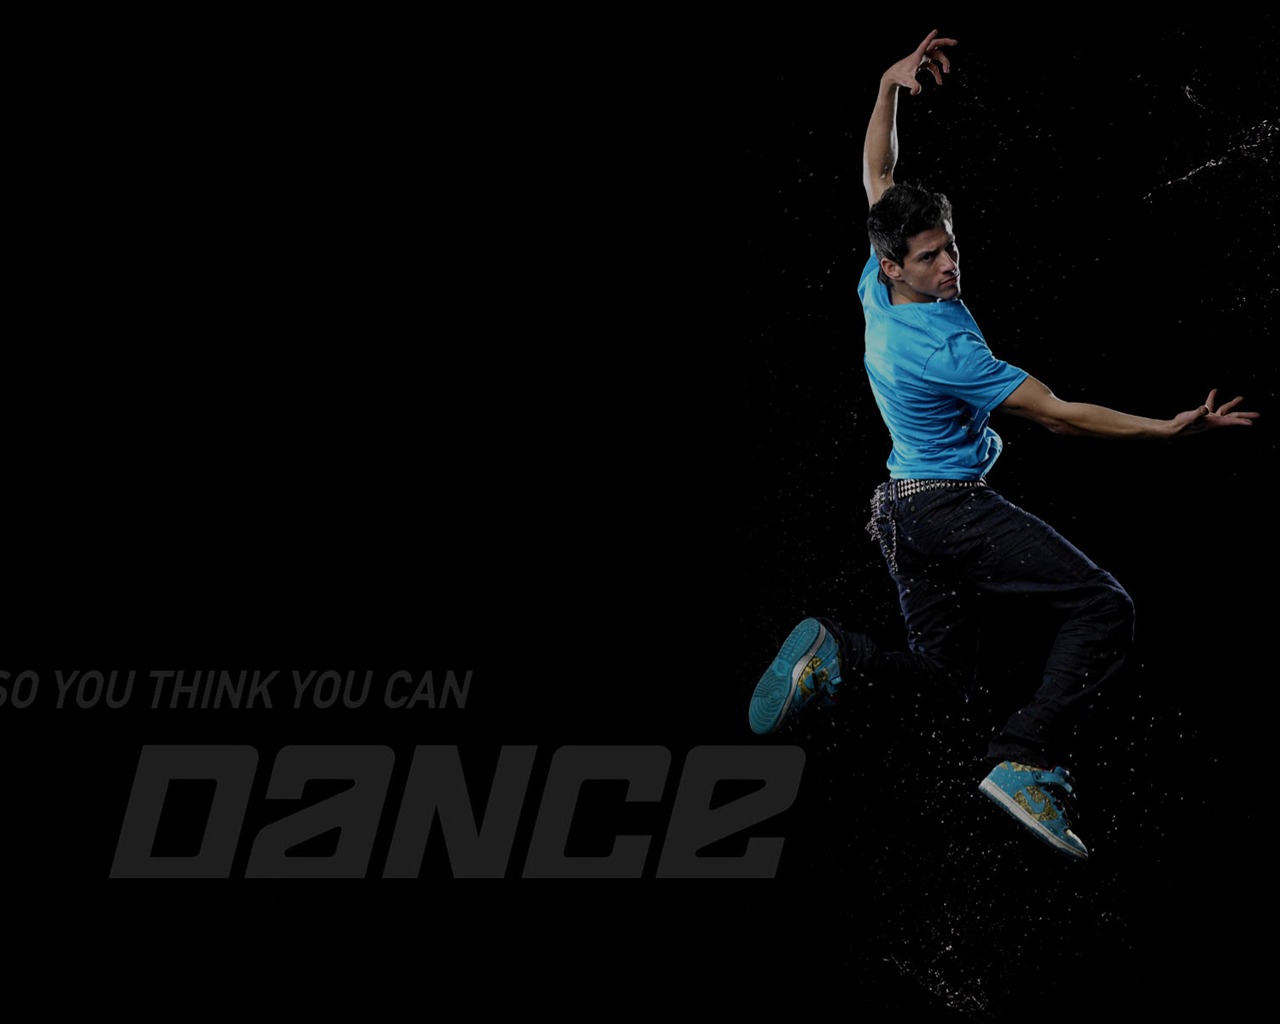 So You Think You Can Dance 舞林爭霸壁紙(二) #18 - 1280x1024